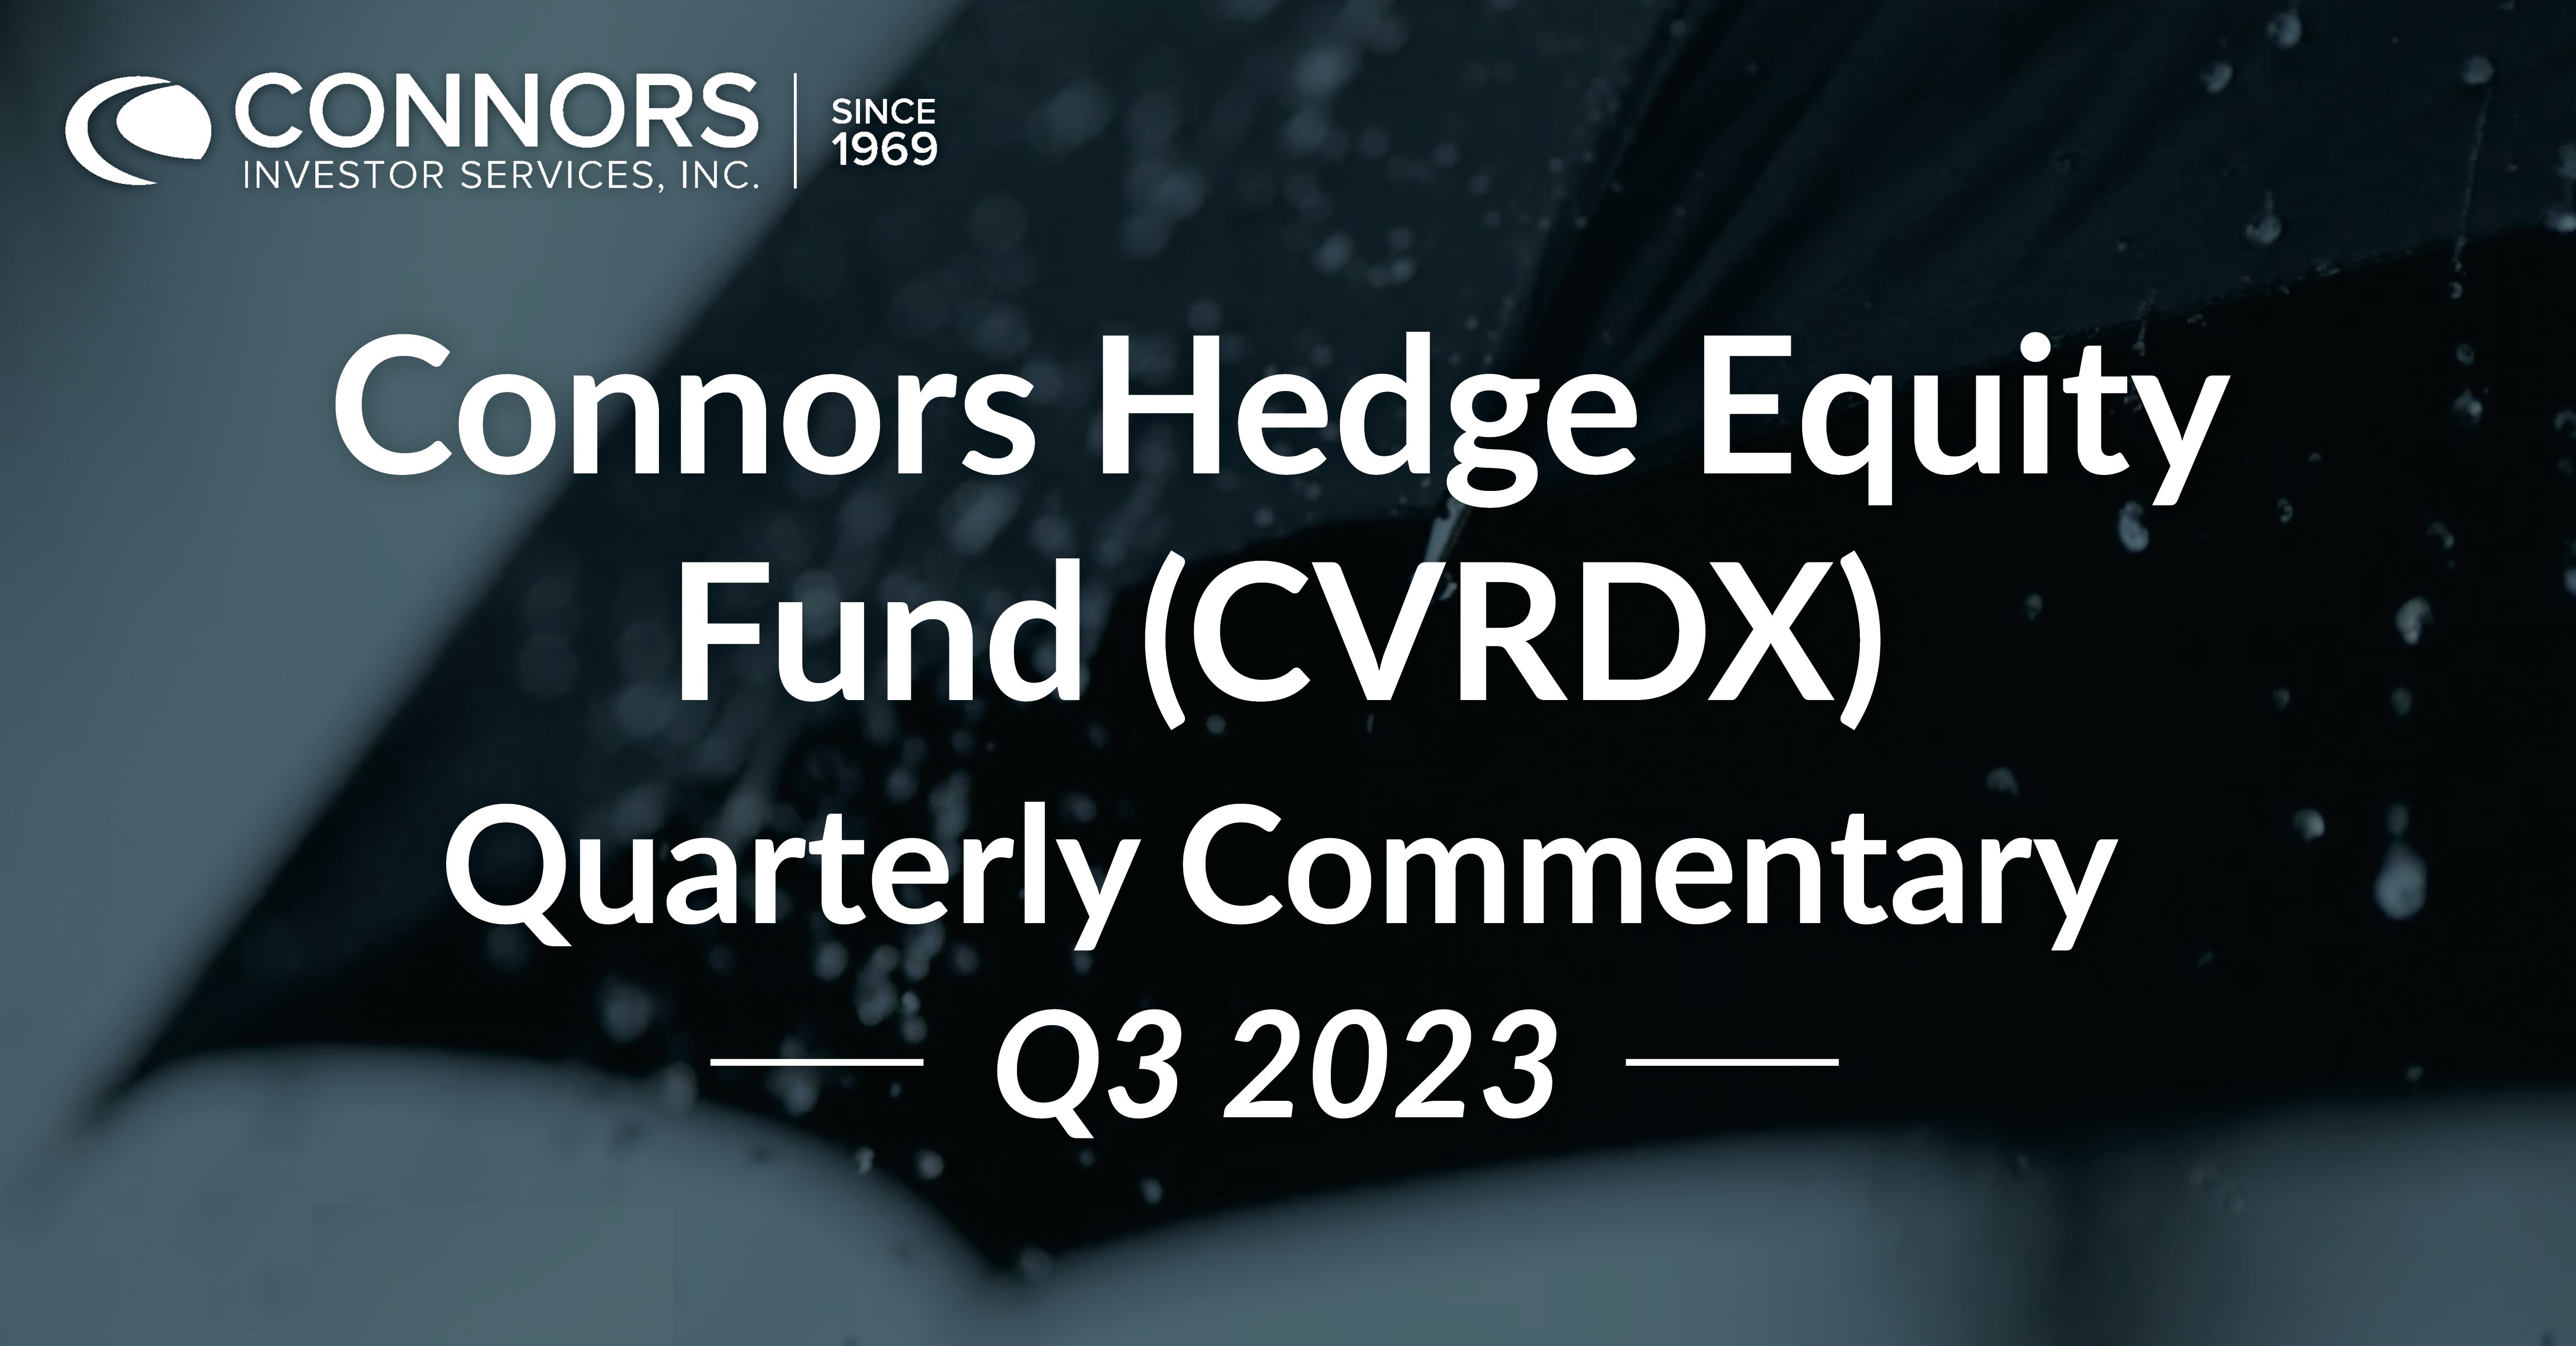 2023 Q3 Connors Hedged Equity Fund (CVRDX) Quarterly Commentary